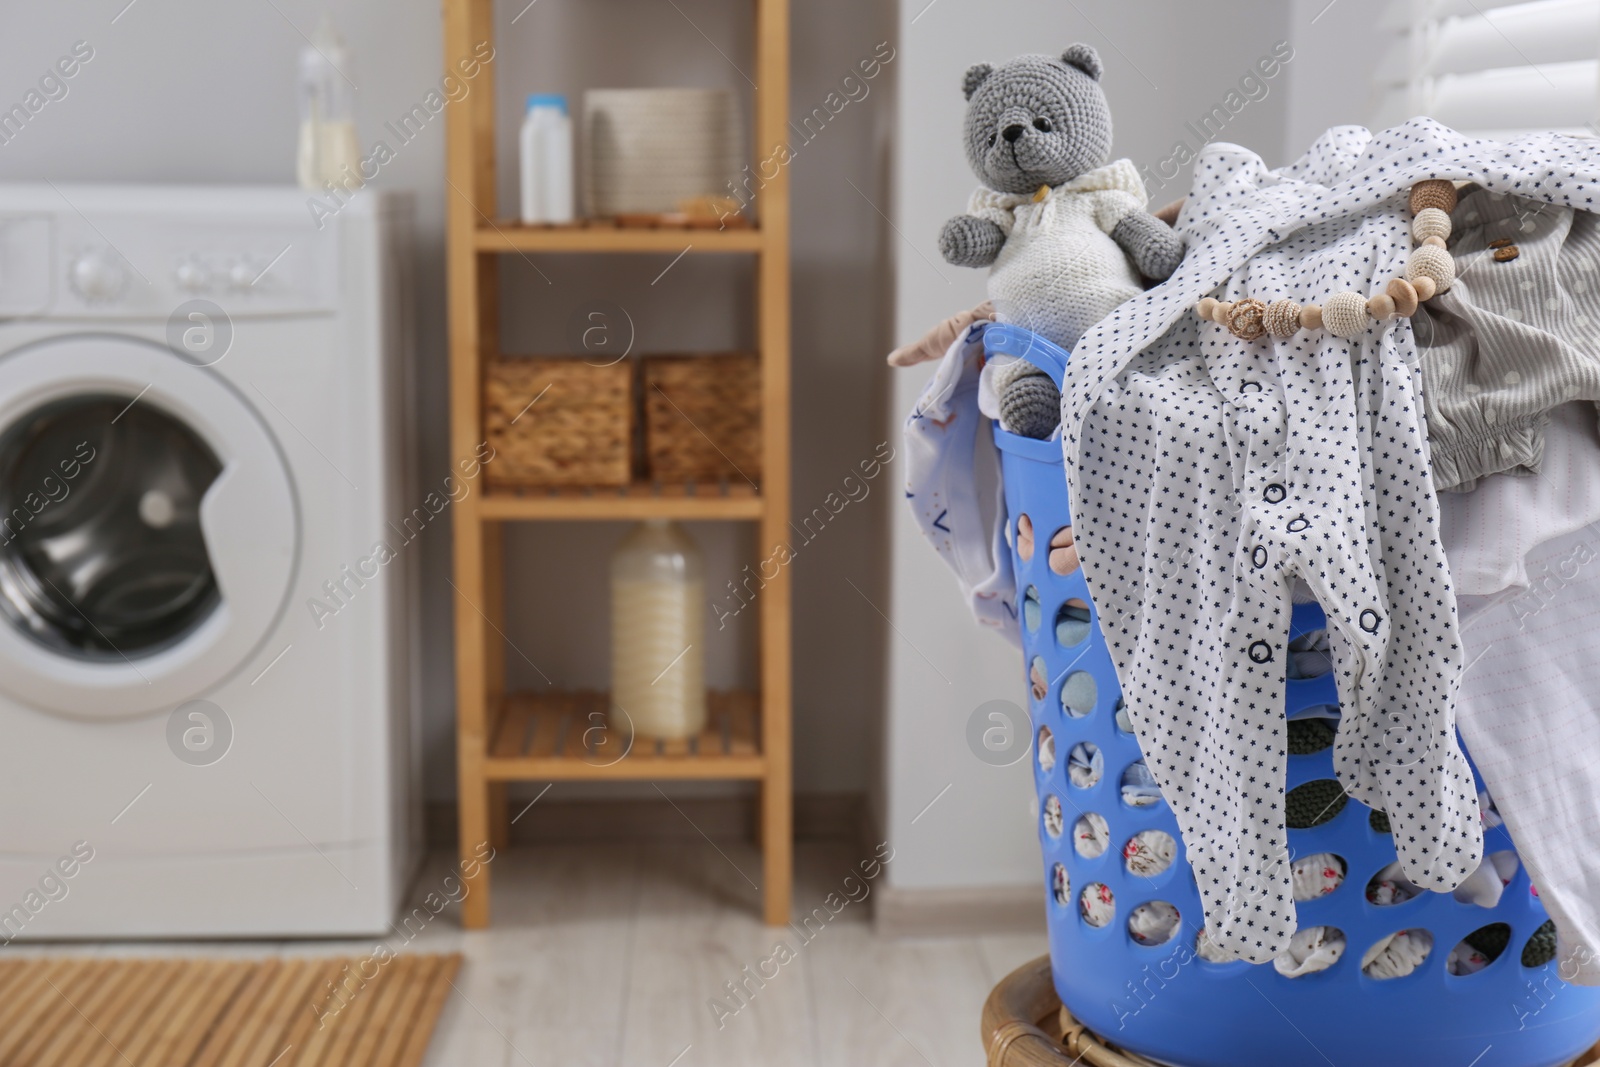 Photo of Laundry basket with baby clothes, shoes and crochet toy in bathroom, space for text